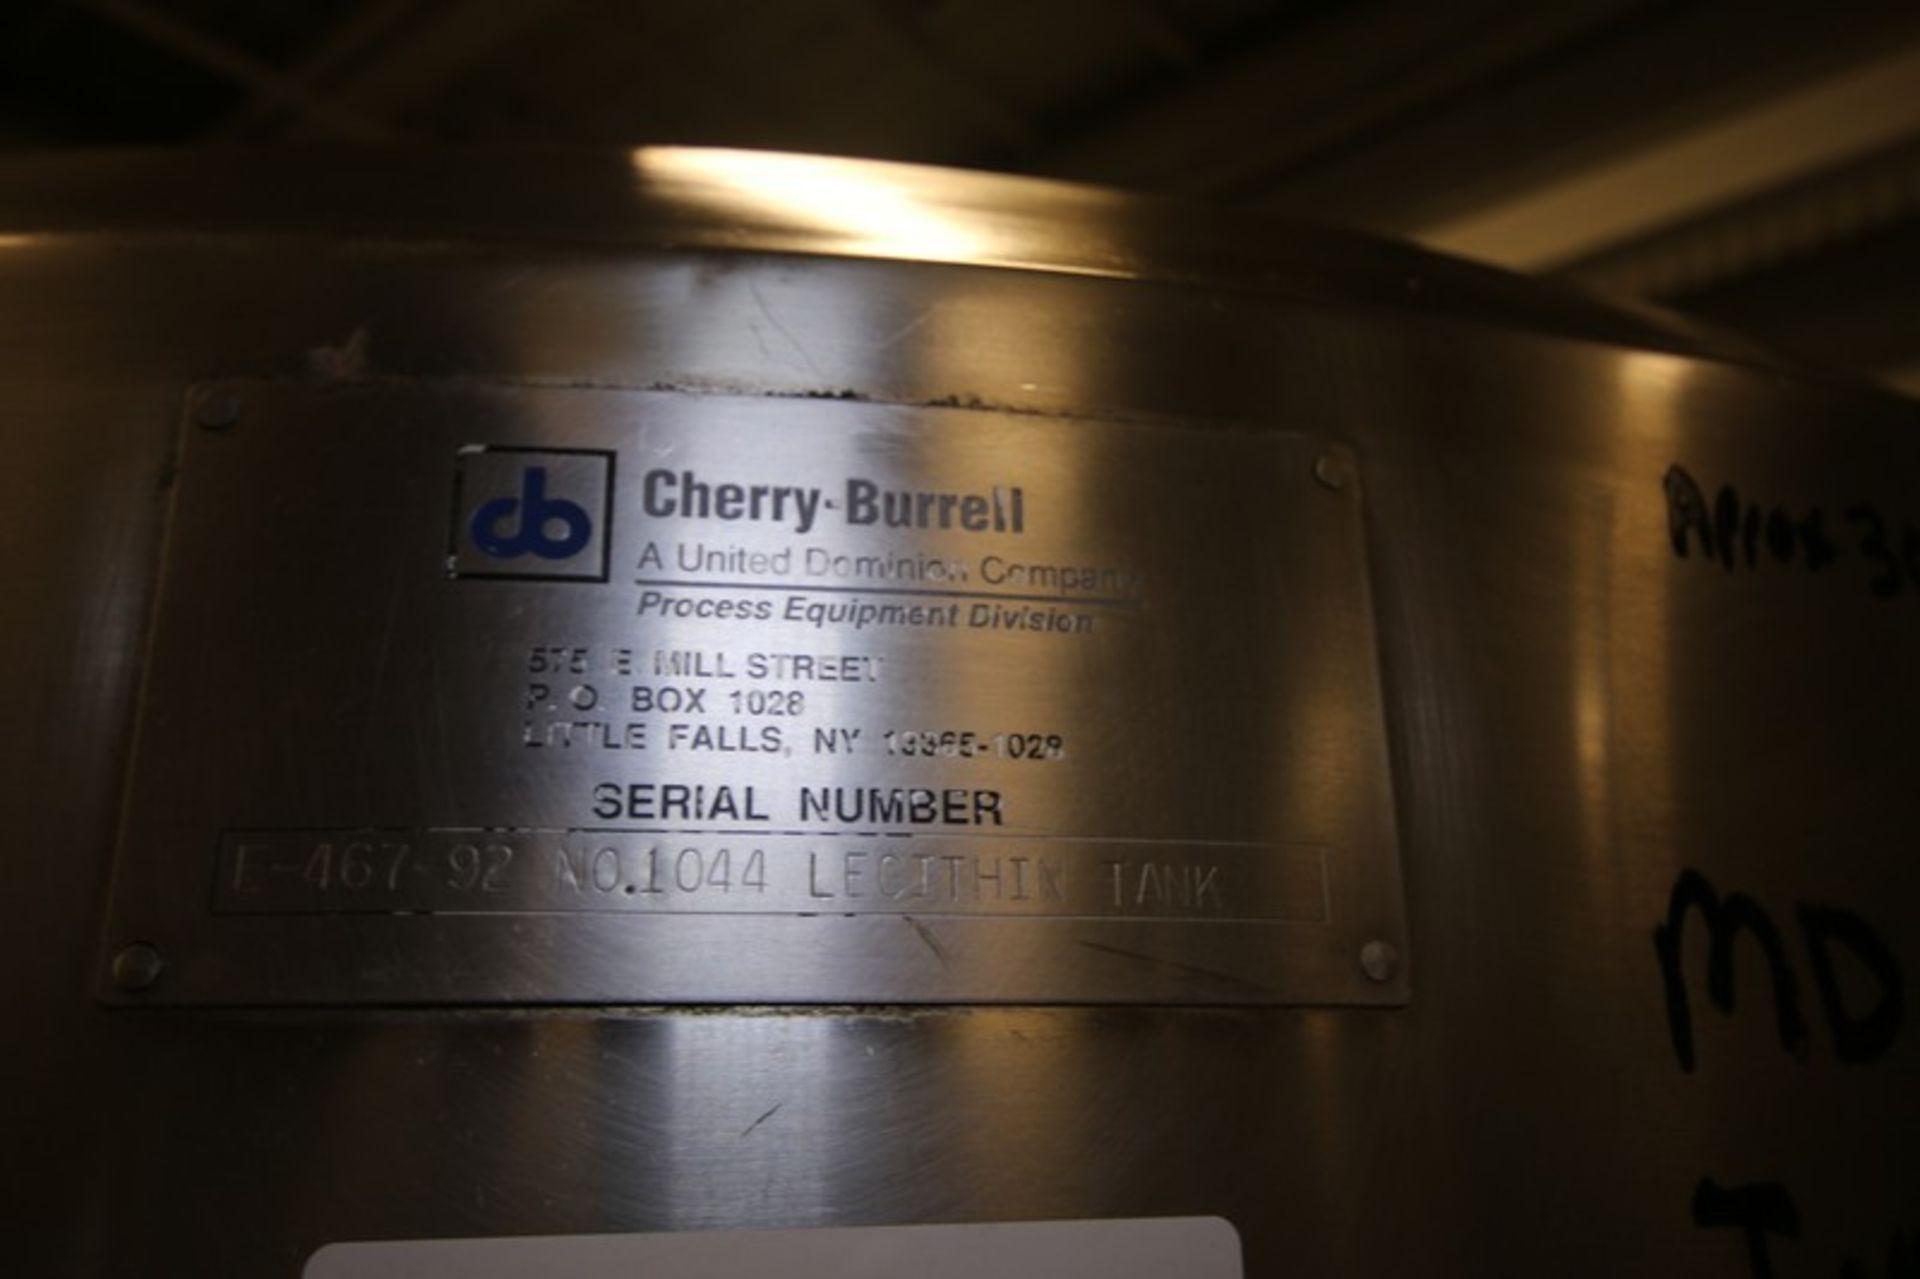 Cherry-Burrell Hinged Lid, Aprox. 300 Gallon S/S Processor, SN E-467-92, No. 1044, Lechithin Tank, - Image 8 of 9